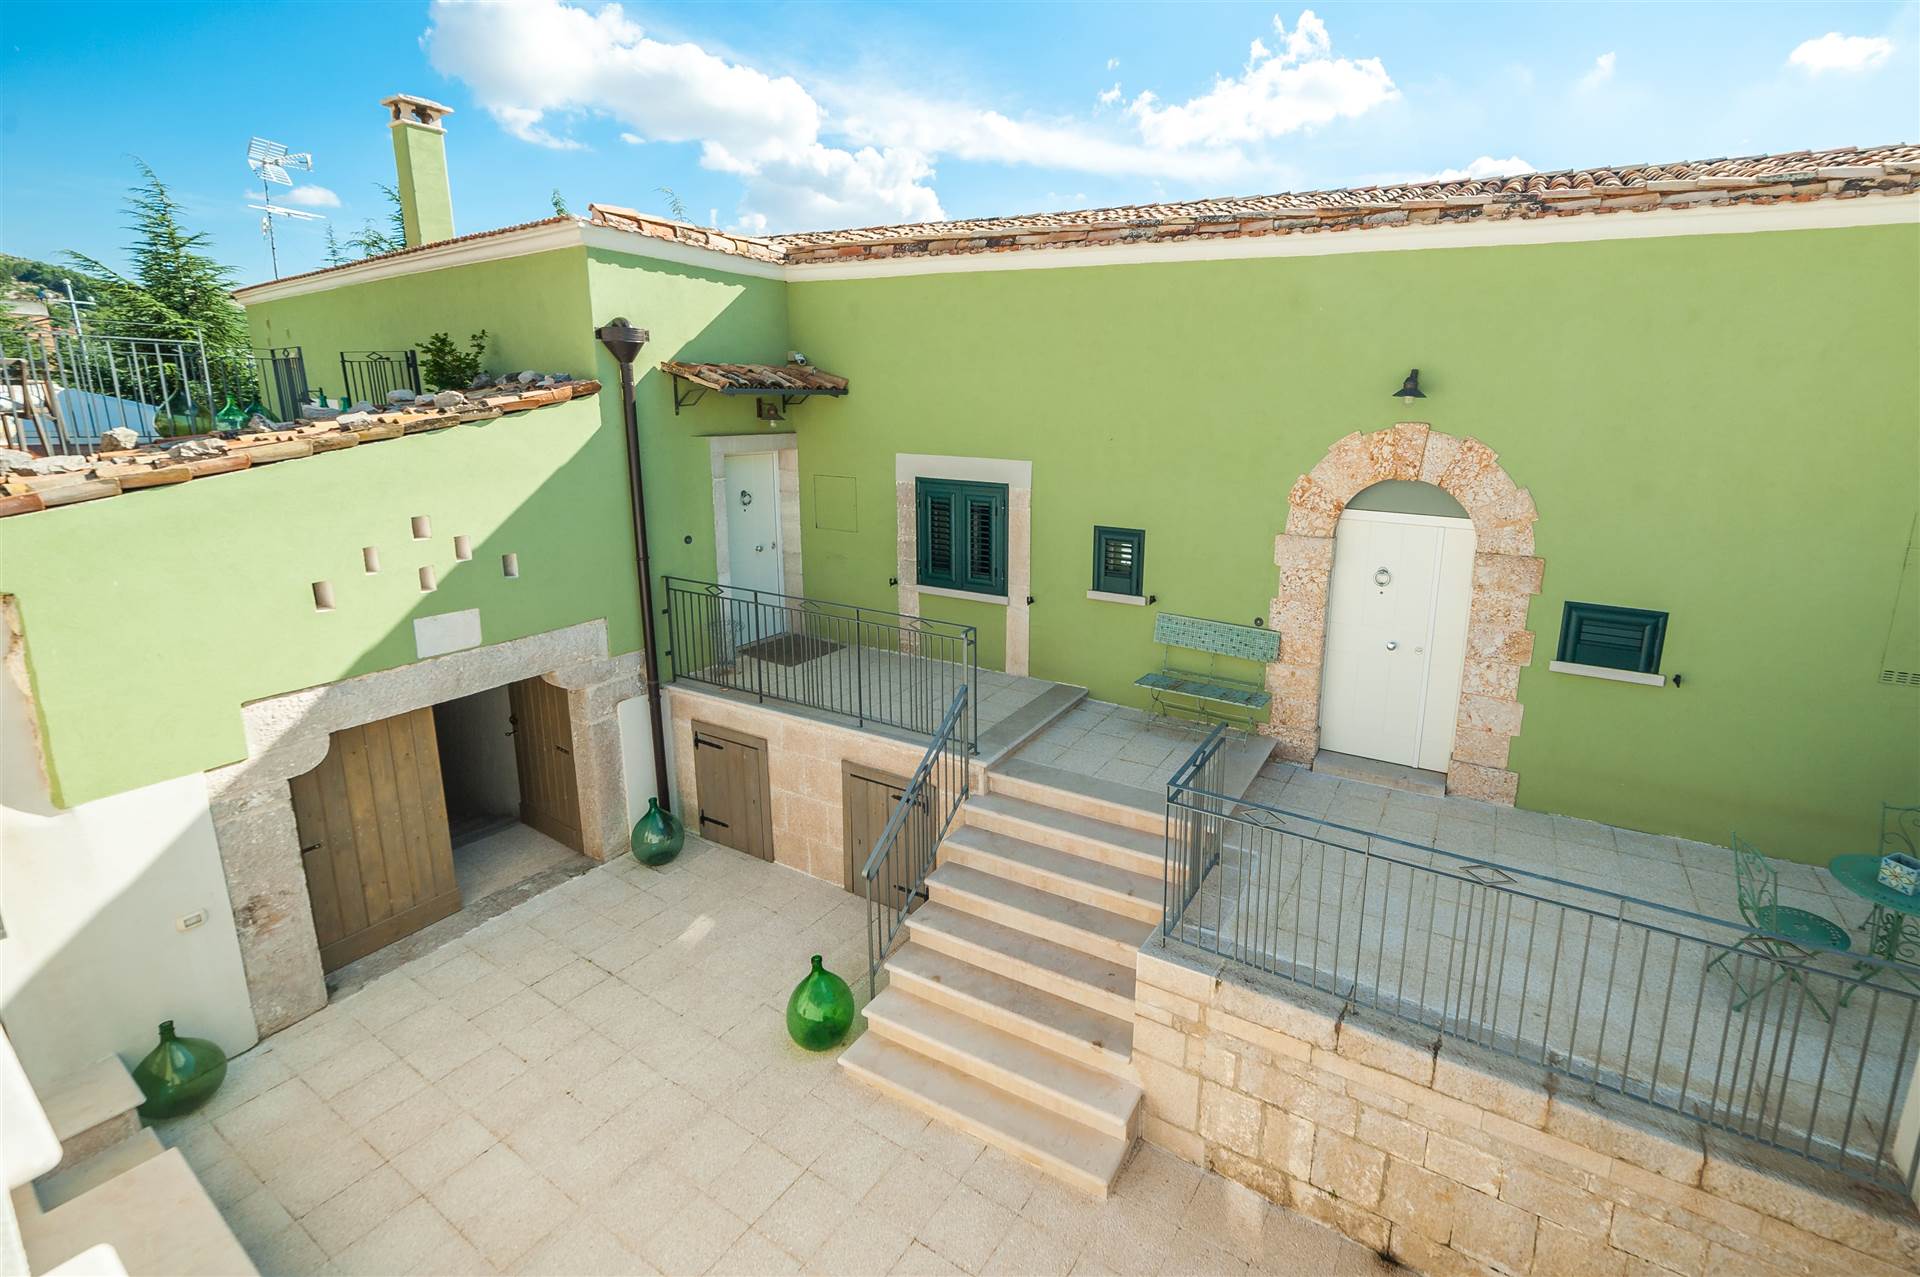 MINERVINO MURGE, Homestead for sale of 350 Sq. mt., Almost new, Heating Individual heating system, Energetic class: B, Epi: 157,43 kwh/m2 year, placed at Ground, composed by: 9 Rooms, Separate 